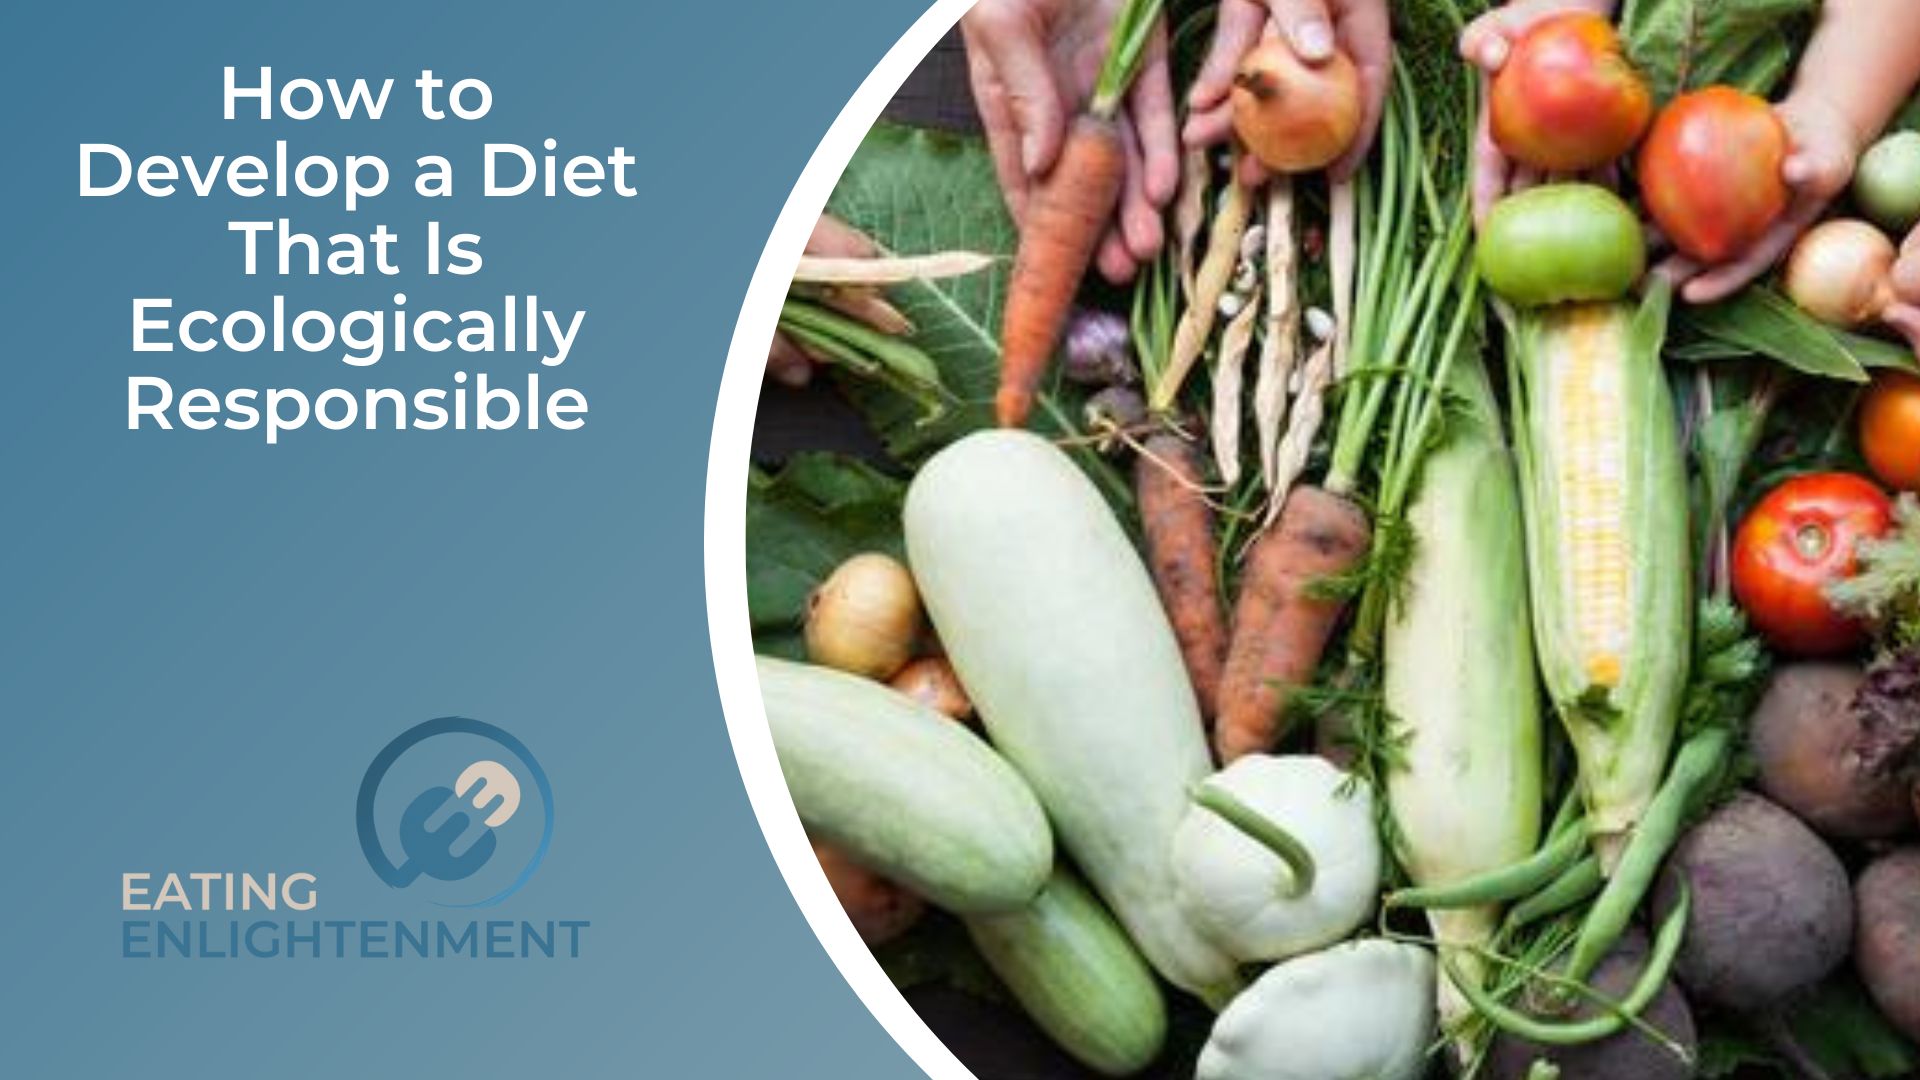 How to Develop a Diet That Is Ecologically Responsible